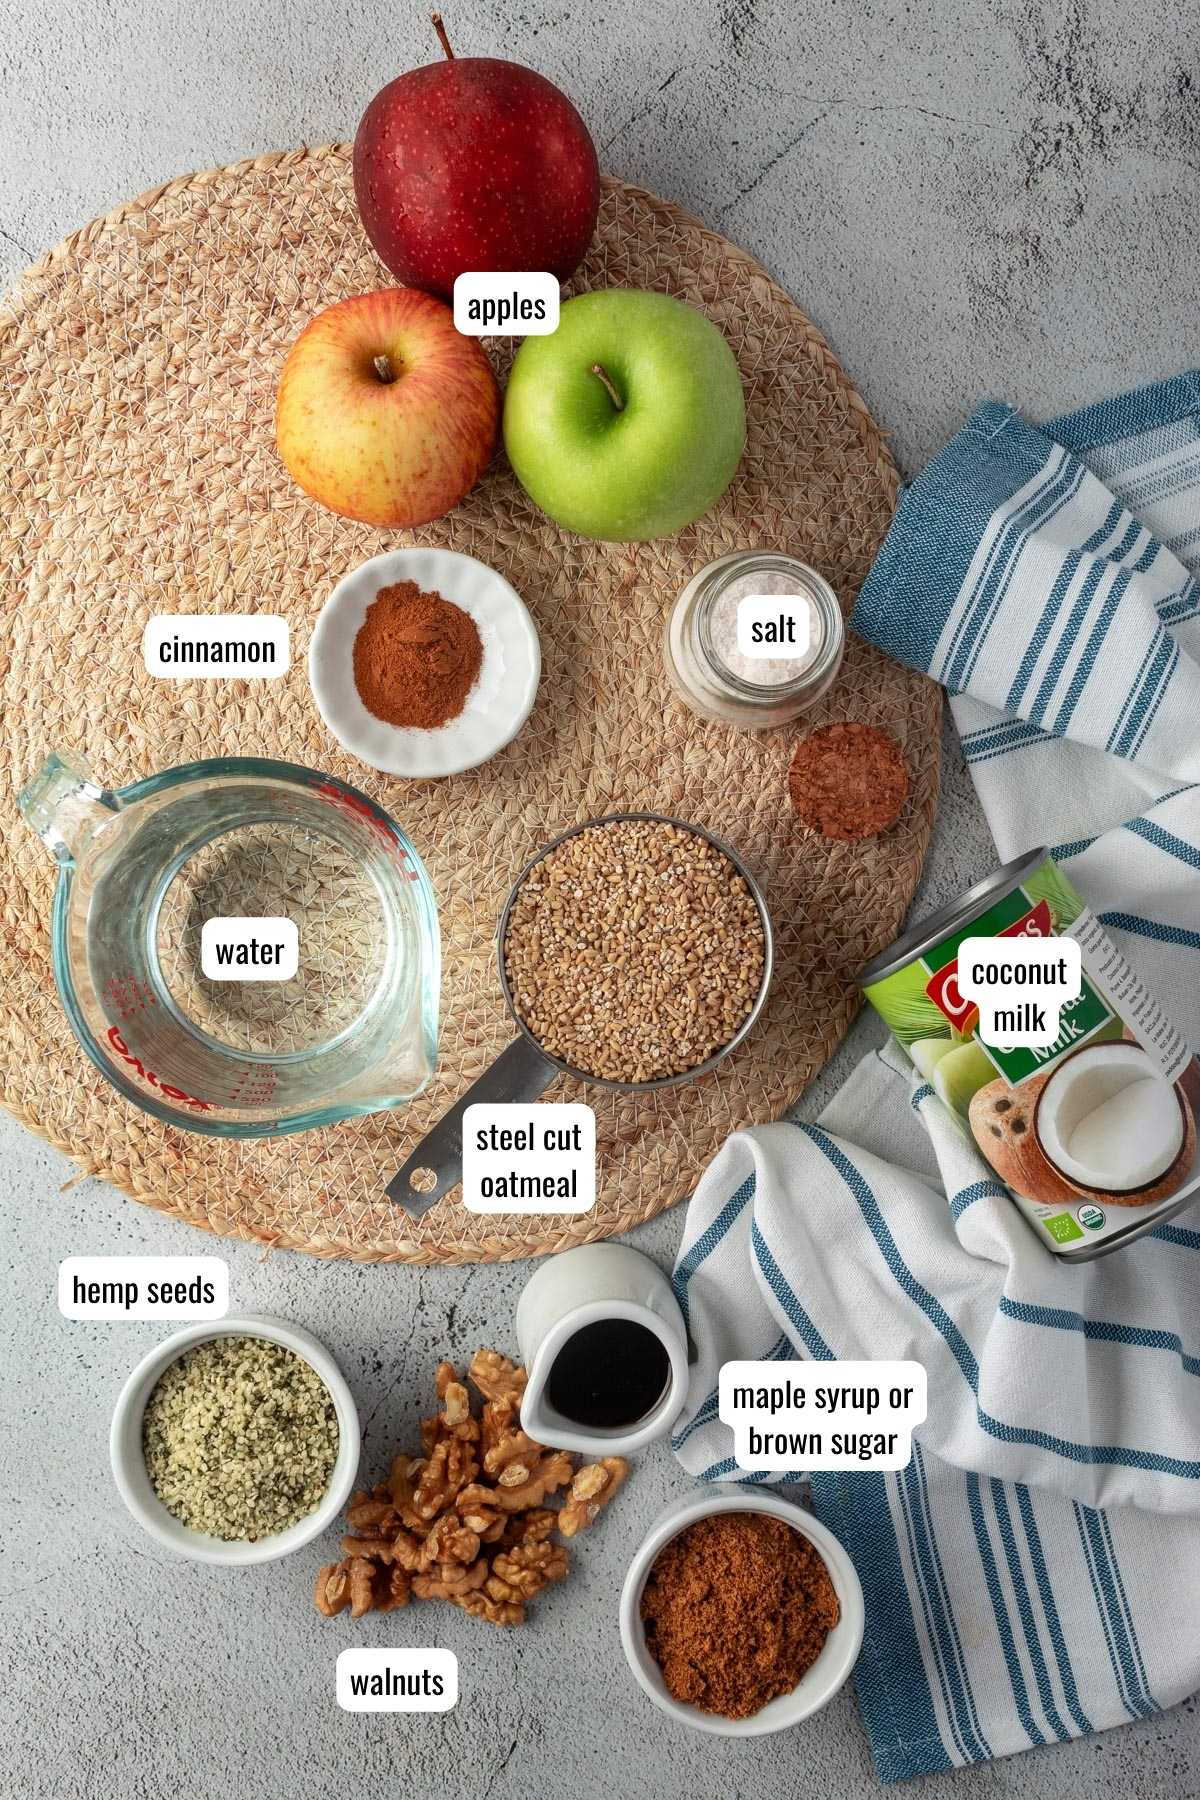 Ingredients on the table to make slow cooker apple oatmeal on the counter with text labels.